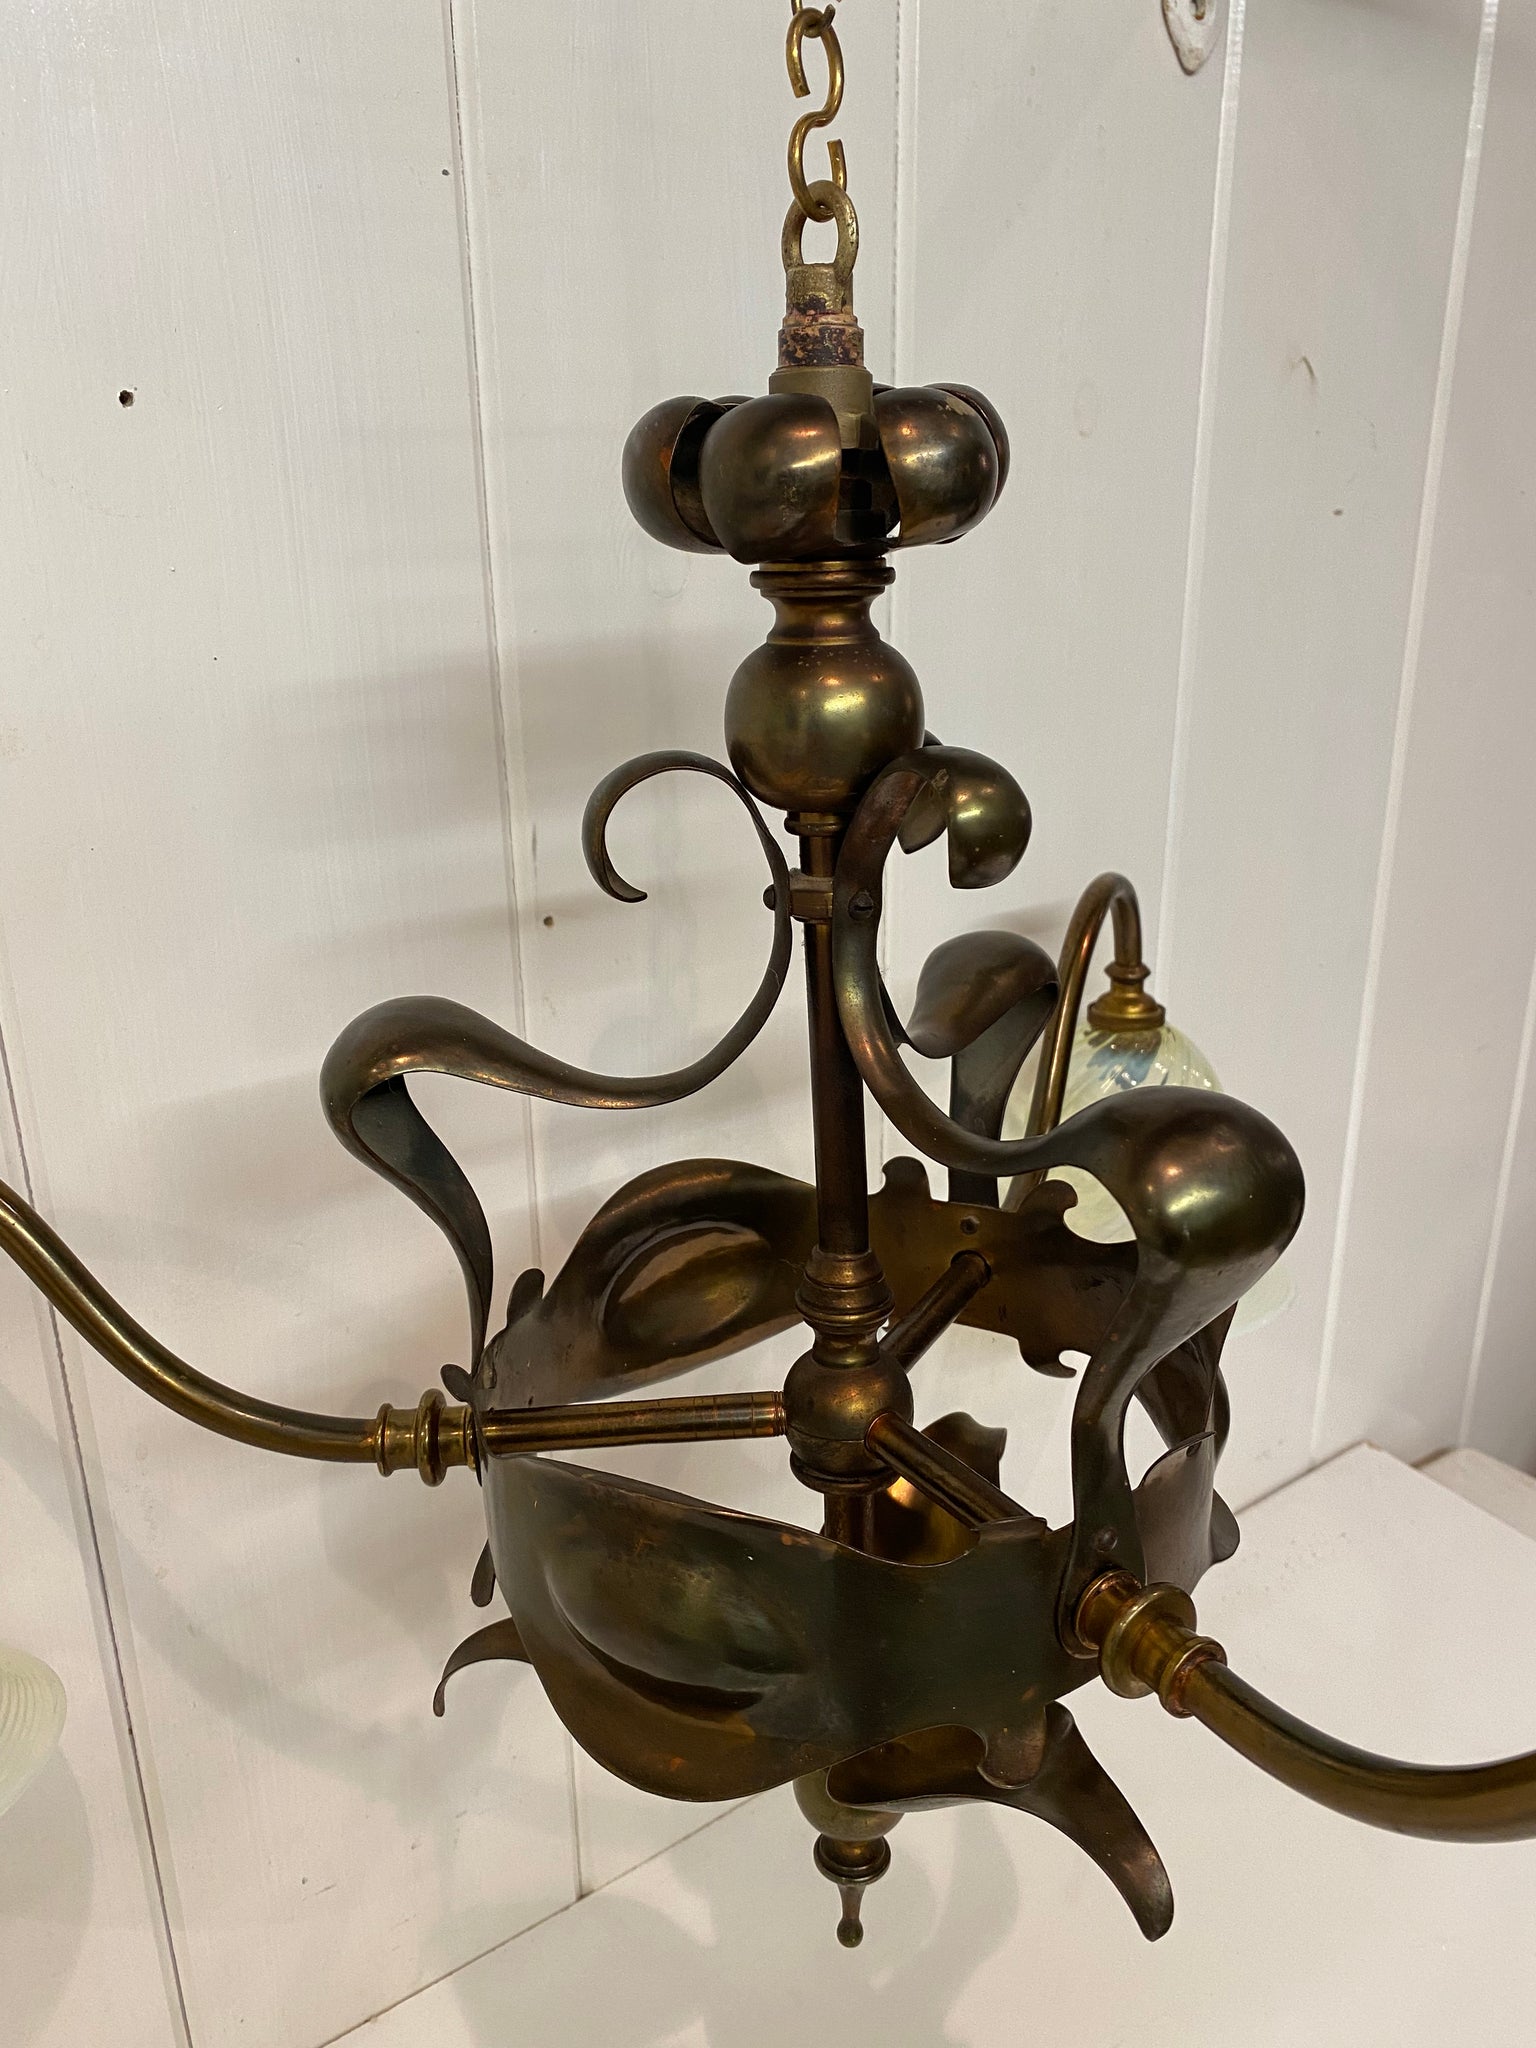 Art Nouveau (Arts and Crafts) 3 Arm Electrolier in Dark Bronze Finish on Copper and Brass C.1900